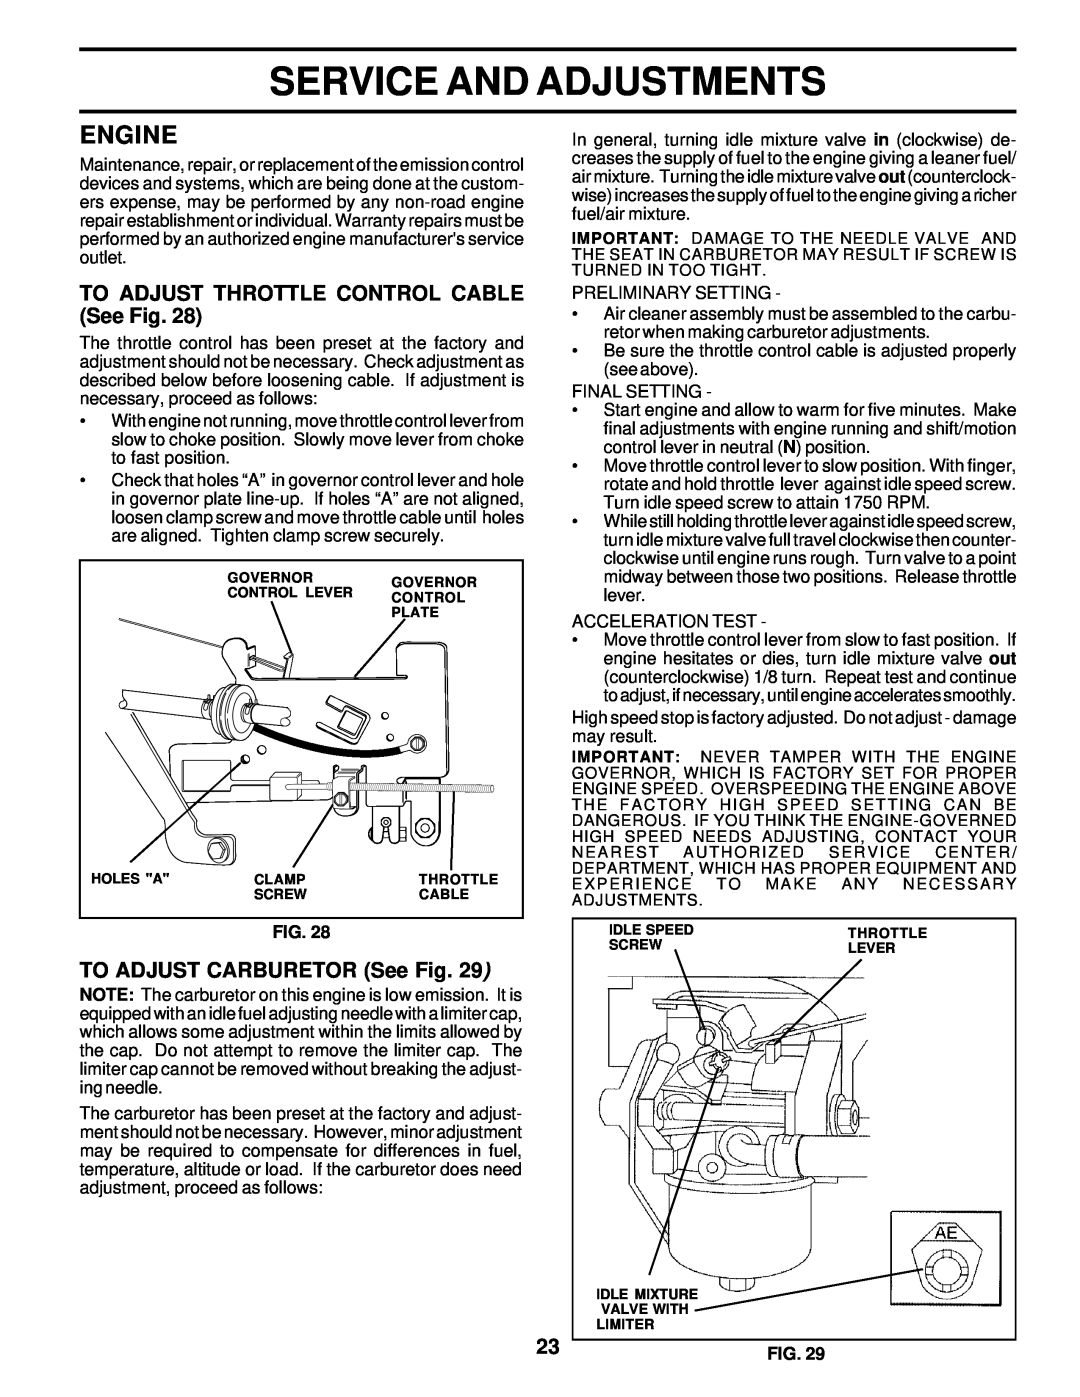 Weed Eater 171883 TO ADJUST THROTTLE CONTROL CABLE See Fig, TO ADJUST CARBURETOR See Fig, Service And Adjustments, Engine 